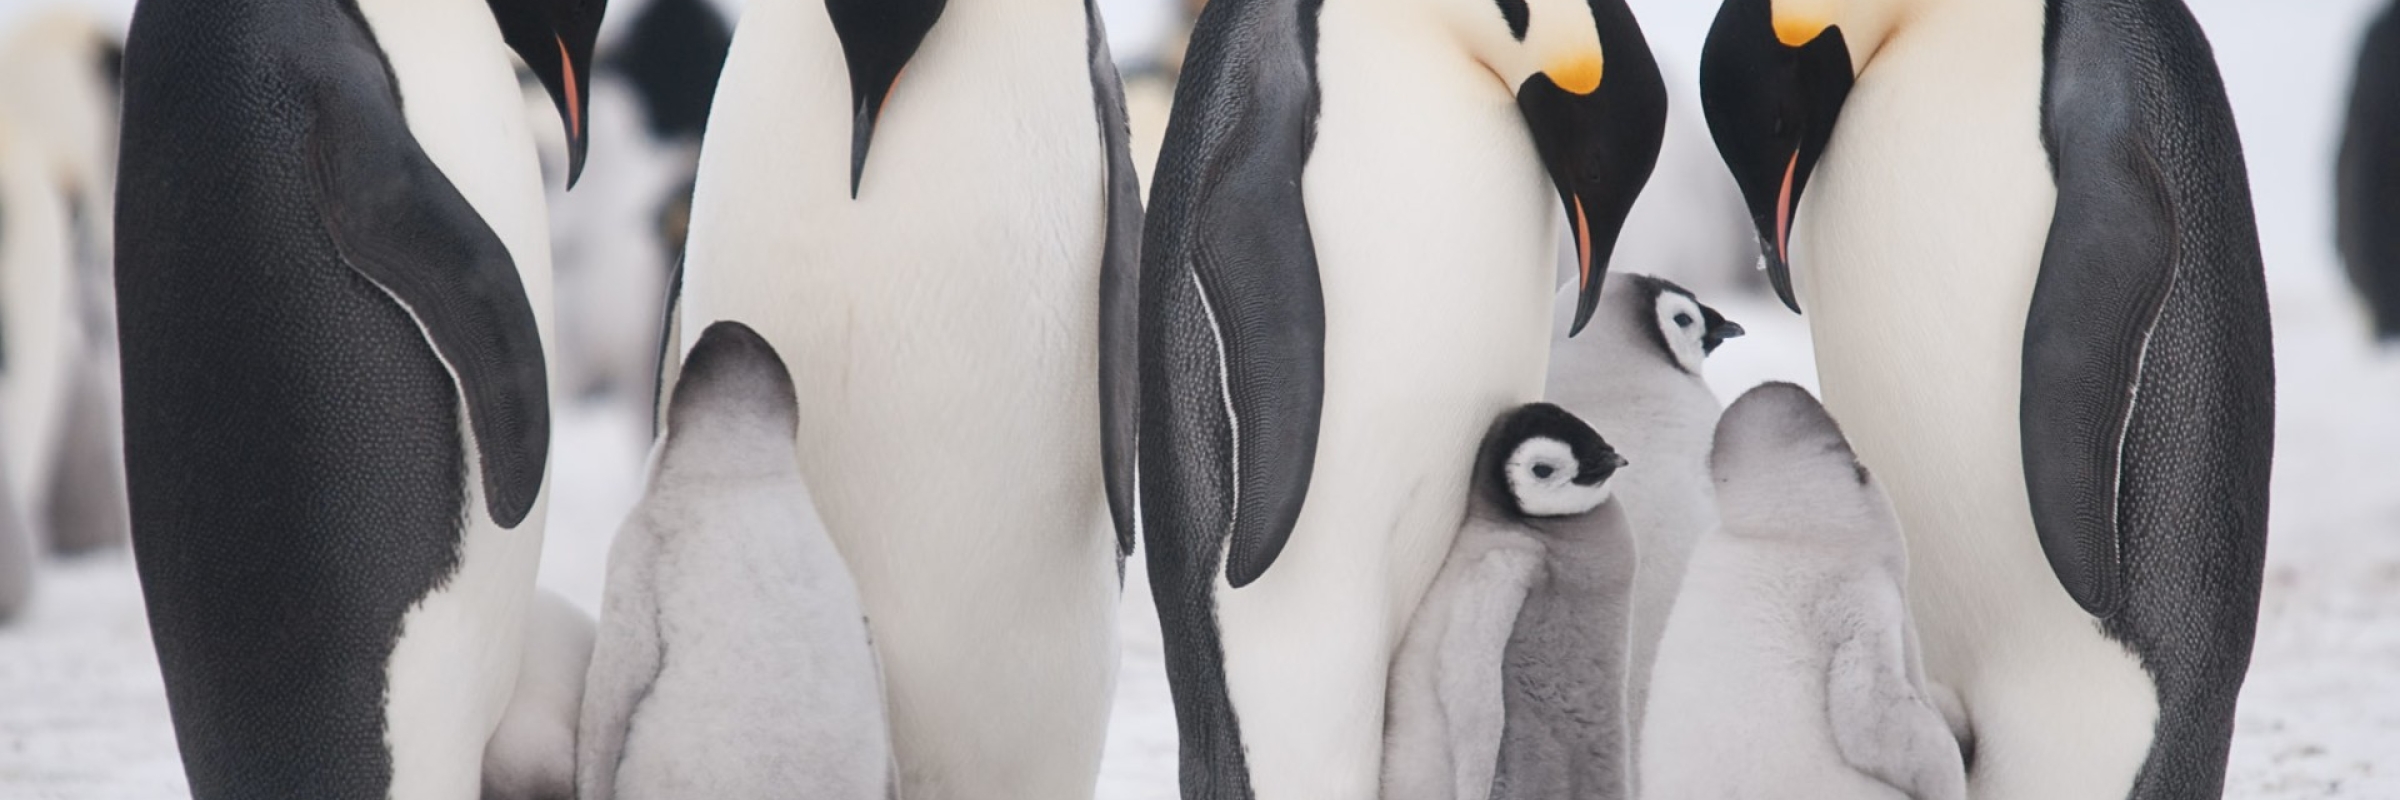 Emperor penguin families at Snow Hill